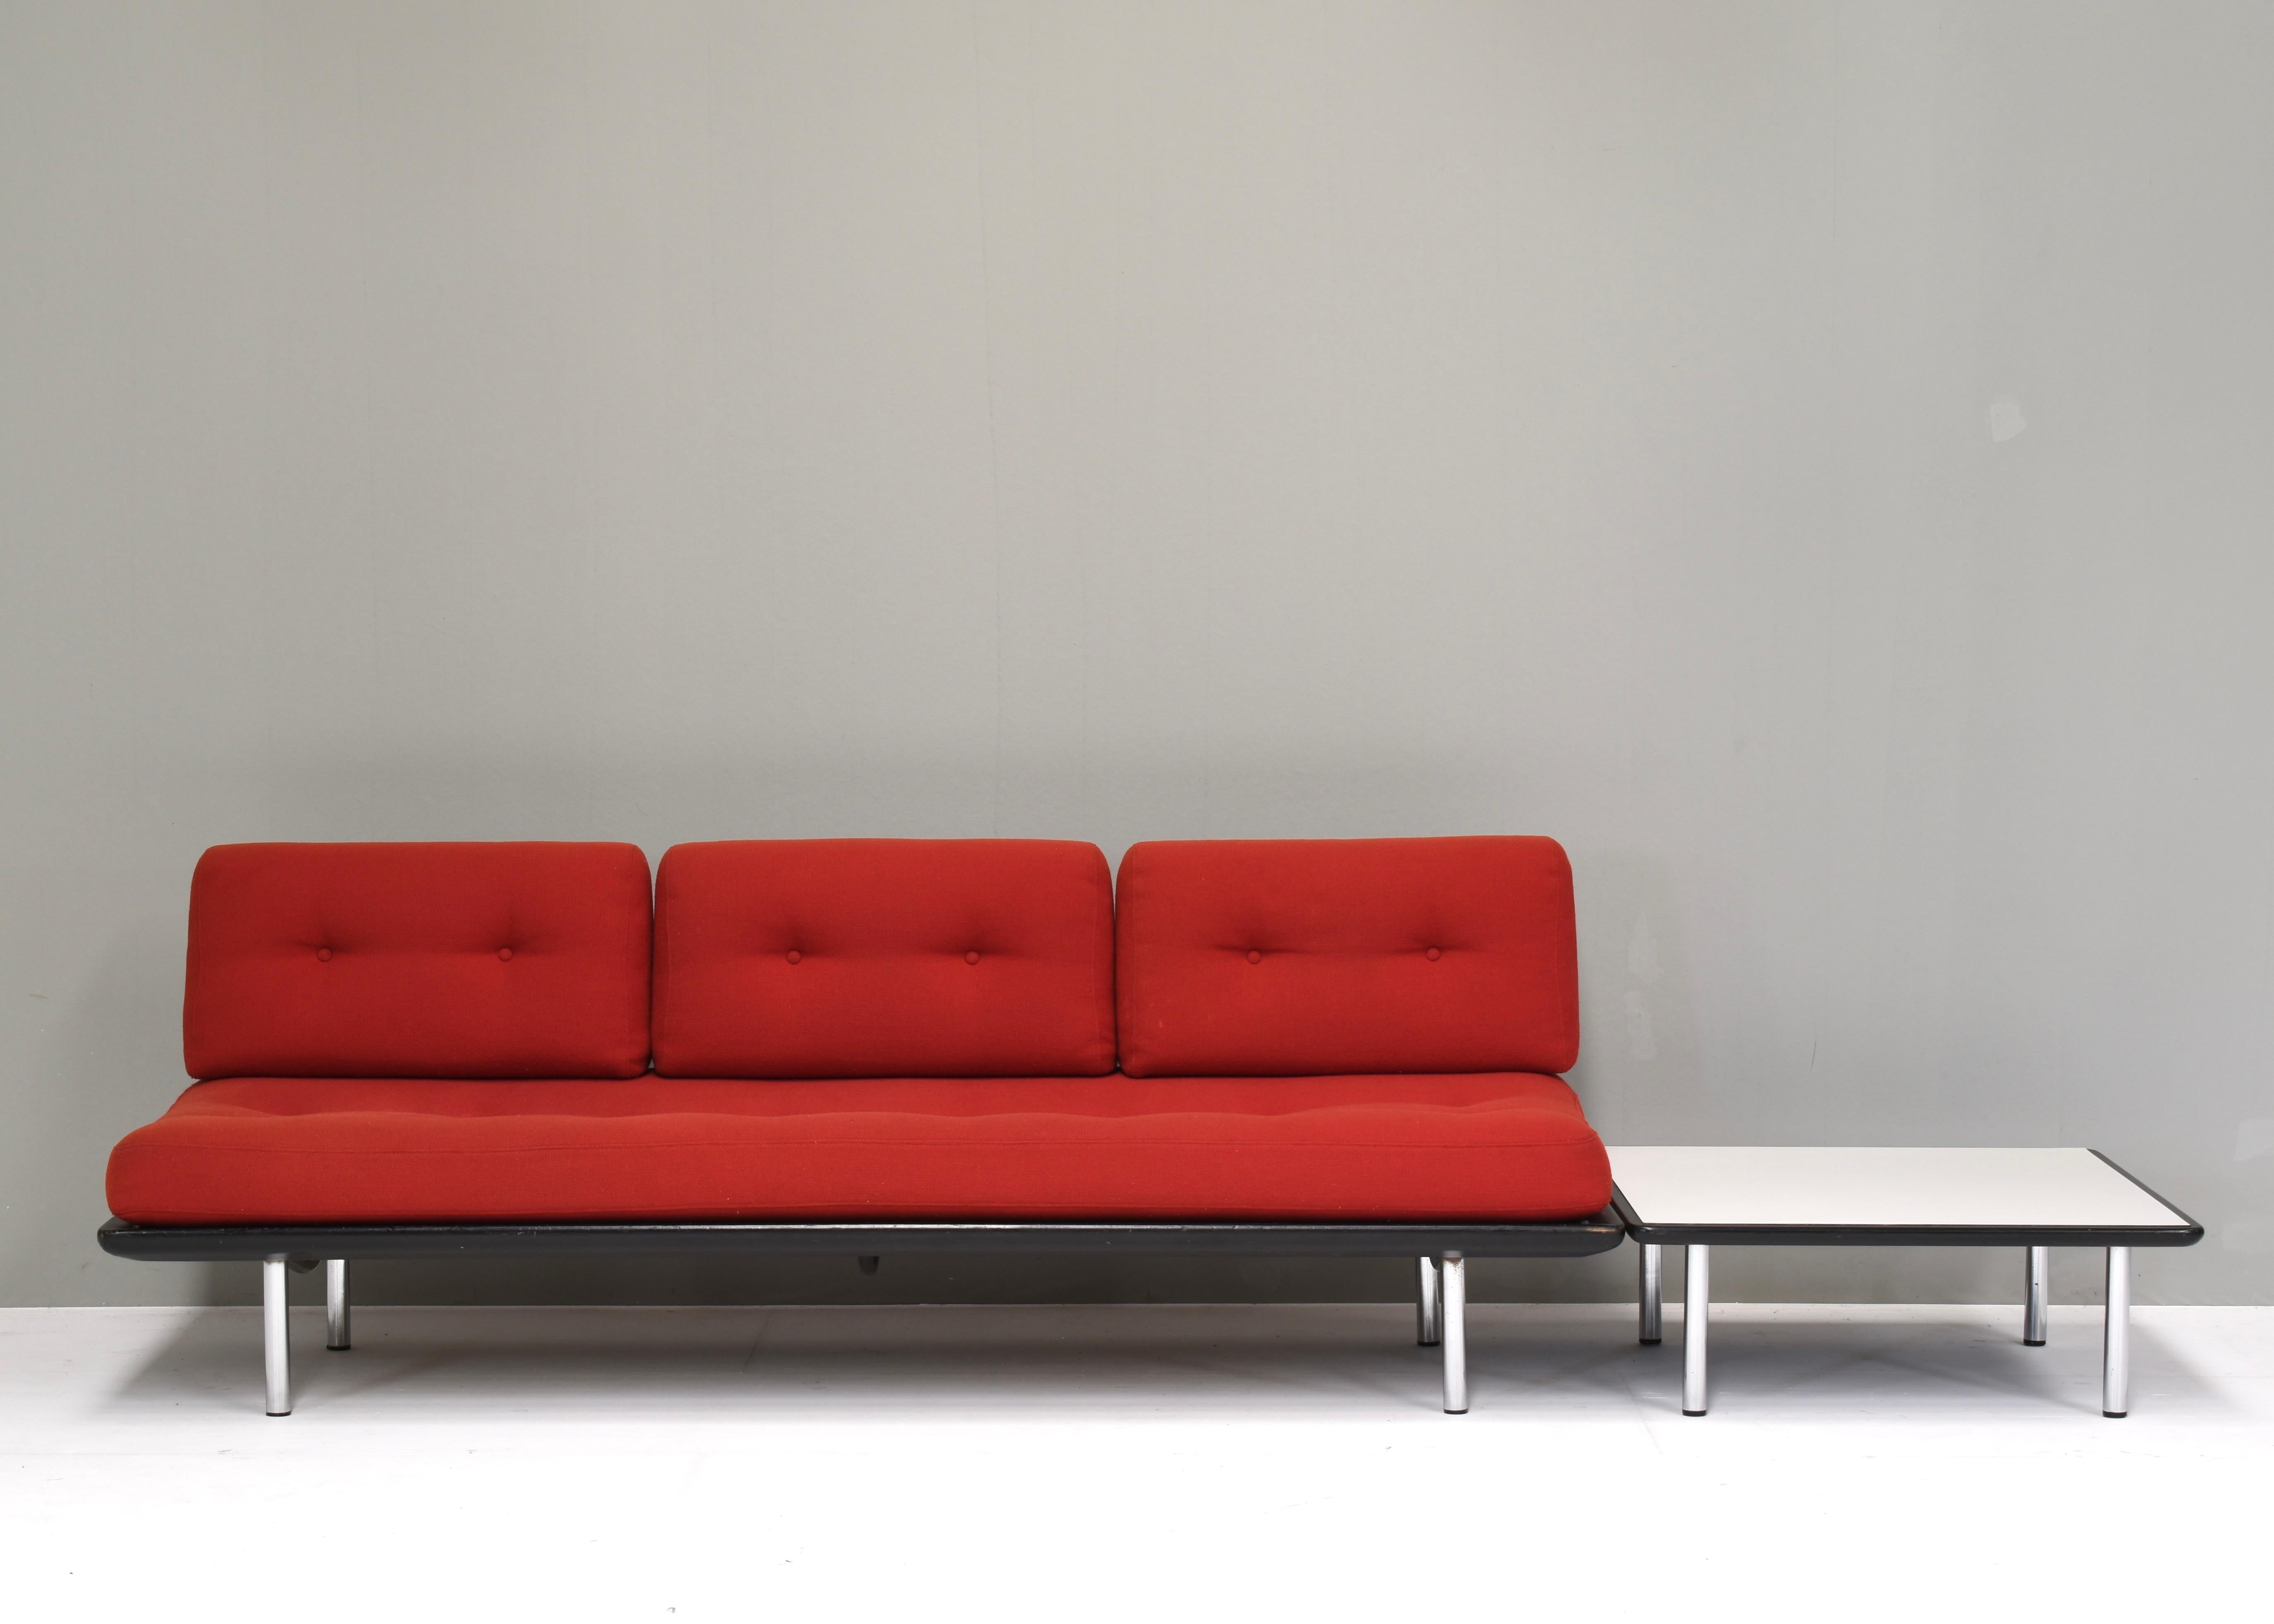 Minimalistic sofa by or in the style of Martin Visser or Kho Liang Ie.

Designer: Unknown. By or in the style of Martin Visser or Kho Liang Ie
Manufacturer: Unknown. By or in the style of ‘t Spectrum or Artifort
Country: Unknown. Probably